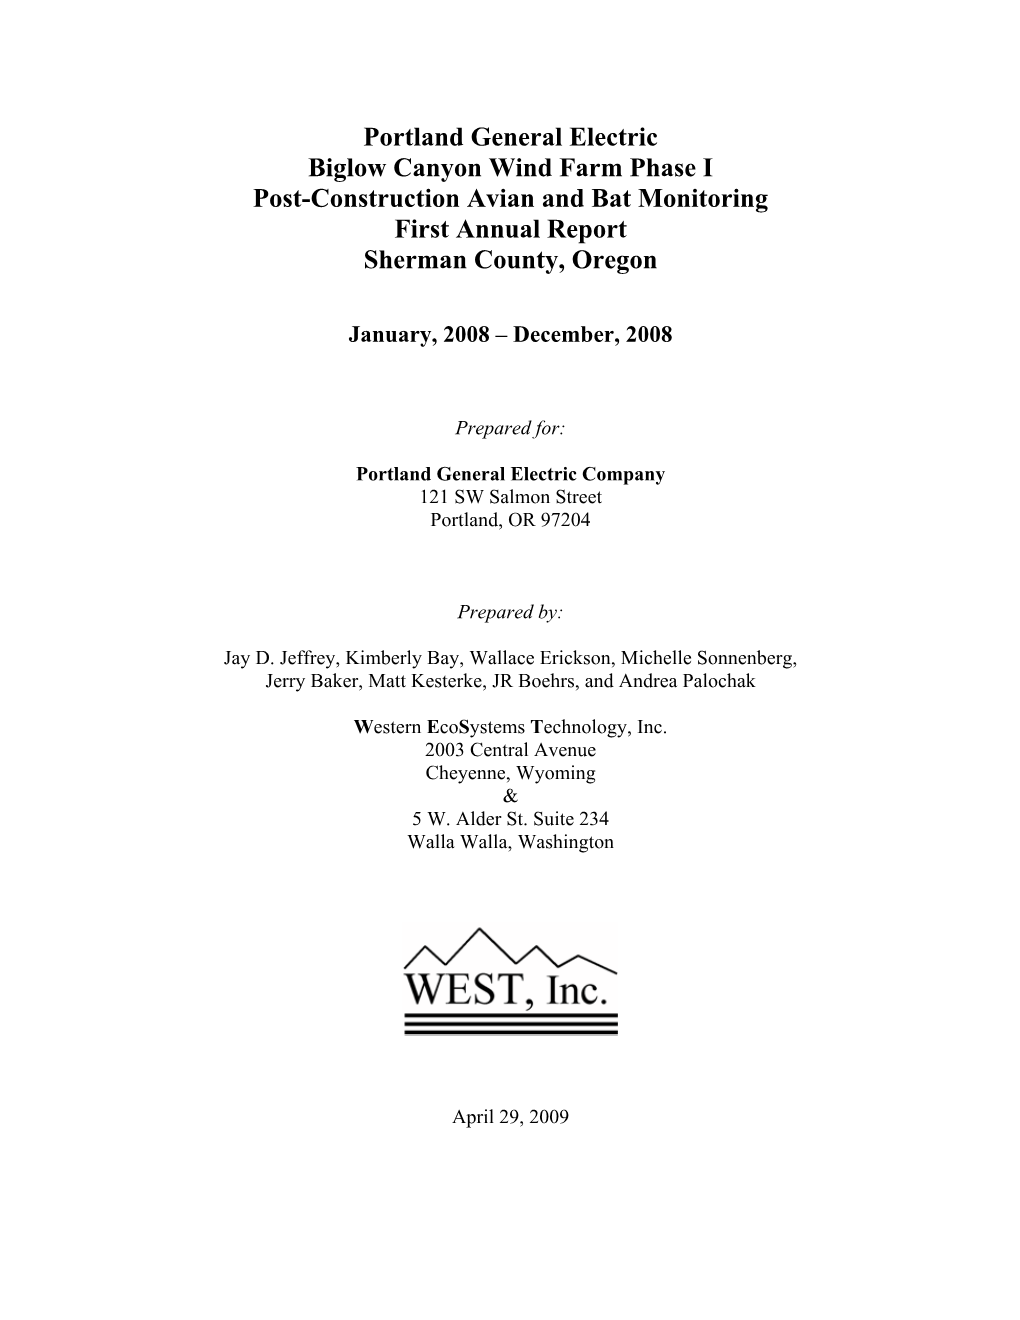 Portland General Electric, Biglow Canyon Wind Farm Phase I, Post-Construction Avian and Bat Monitoring, First Annual Report, January-December 2008